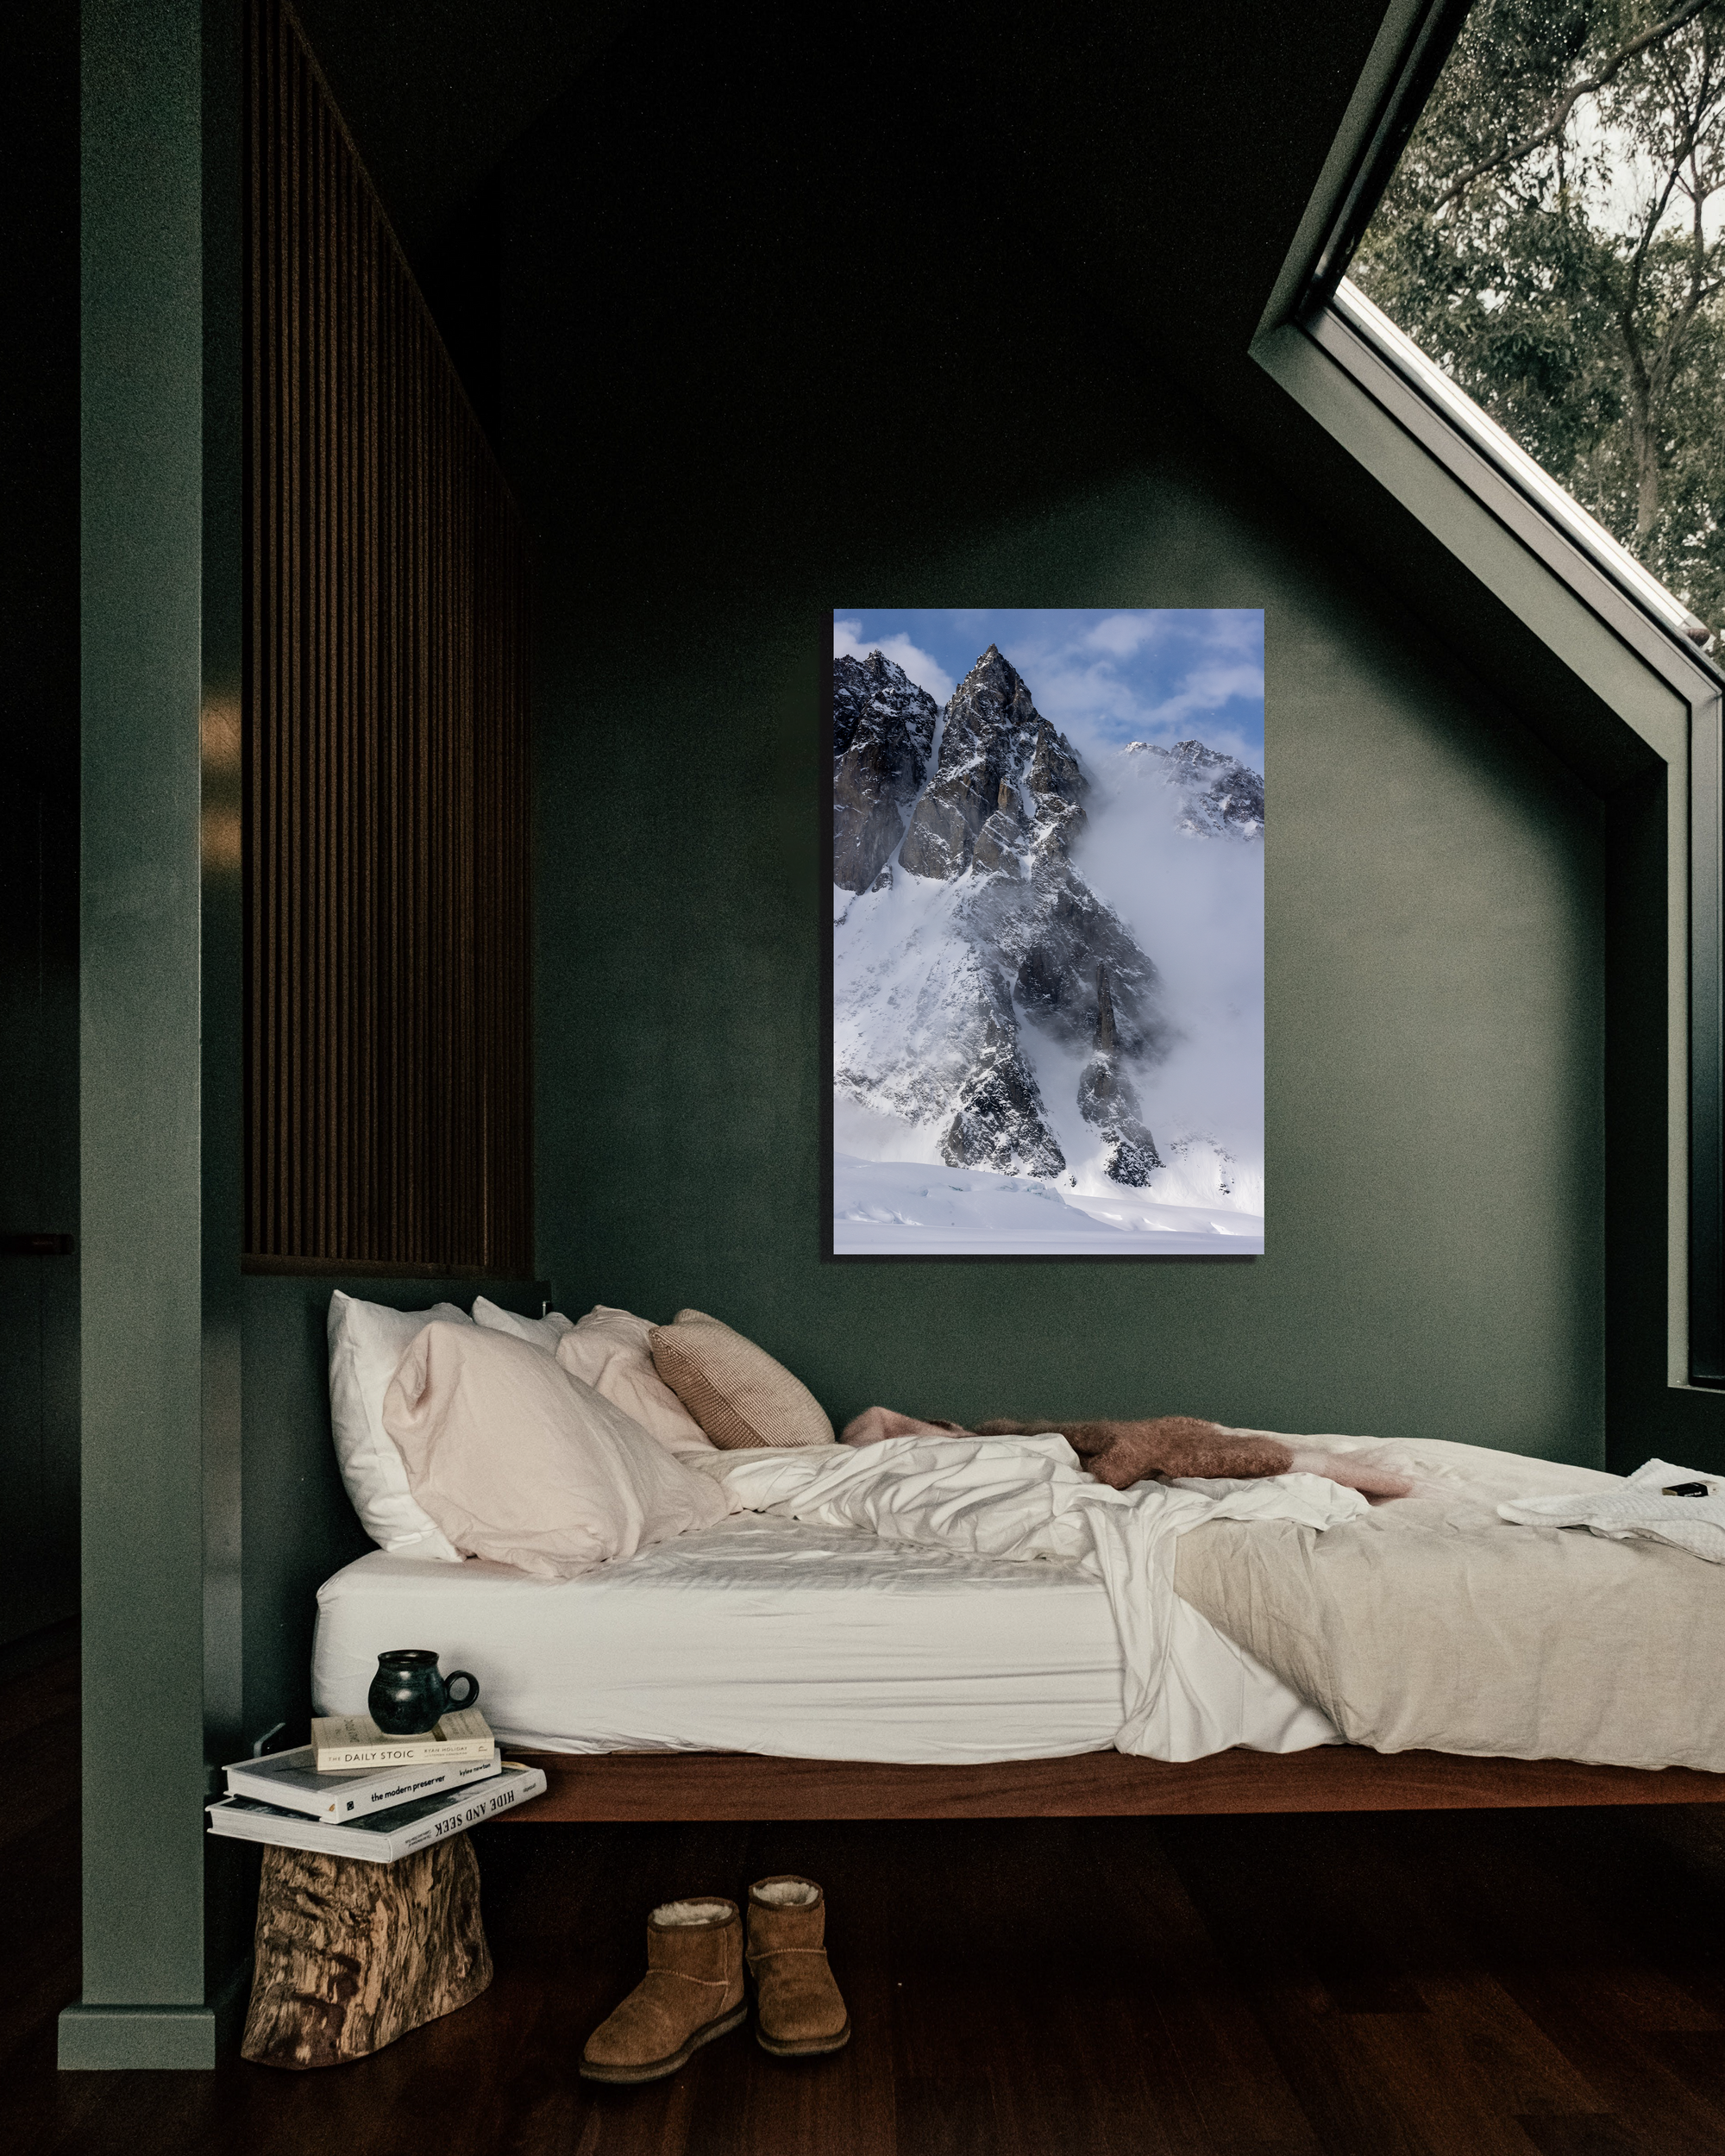 A cozy room with a fine art print of mountains on the wall.